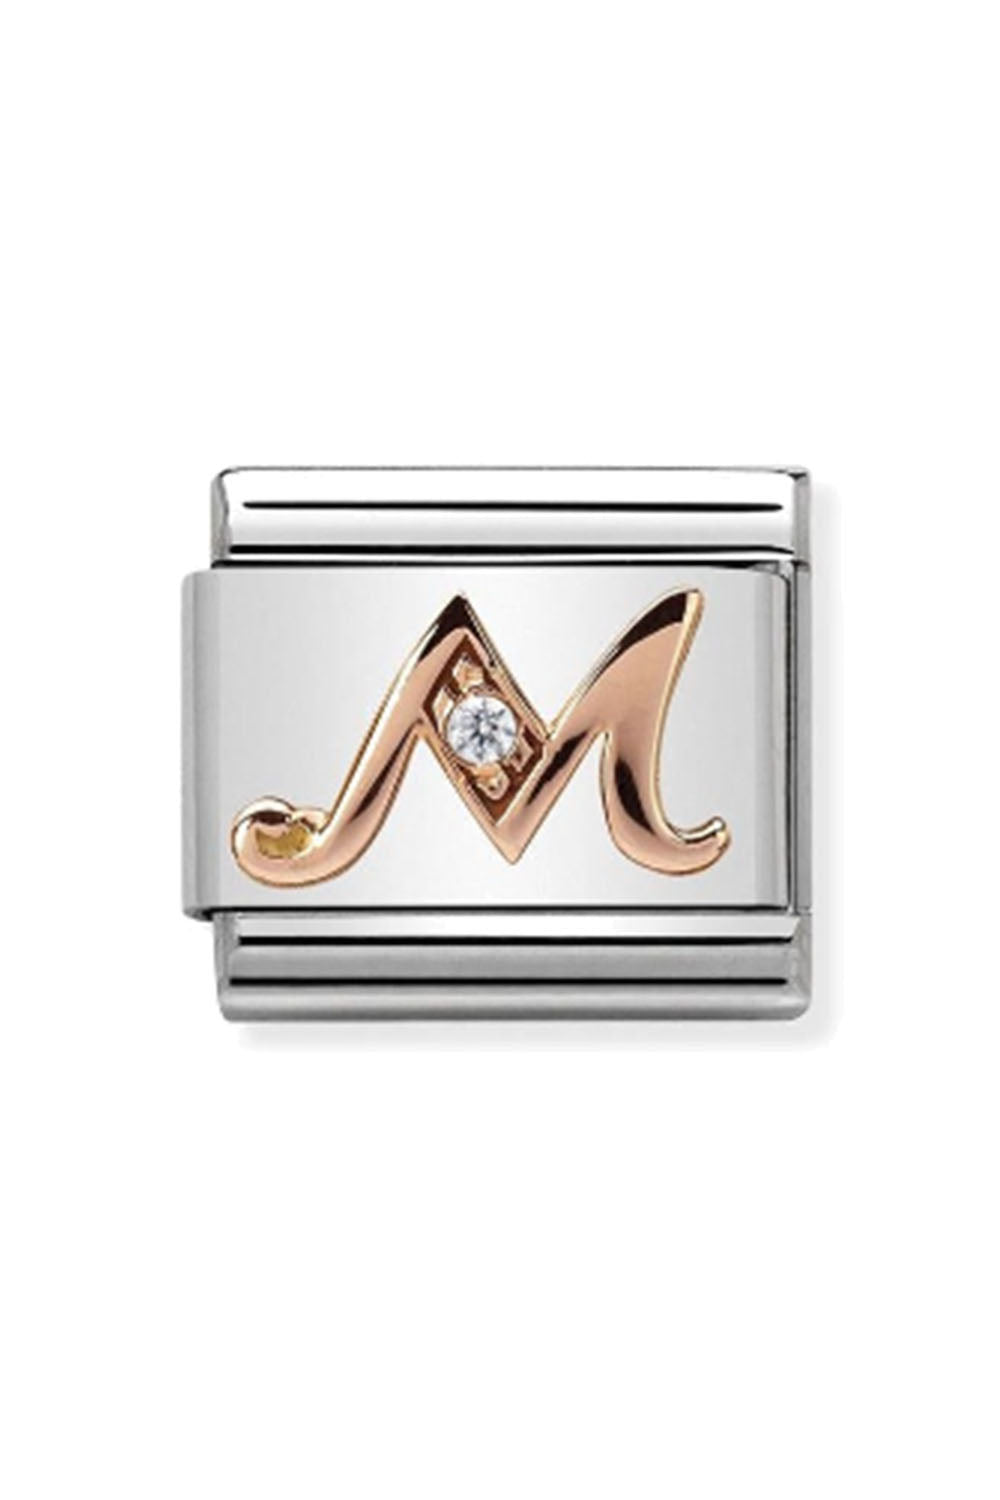 LETTERS 9k rose gold and CZ M